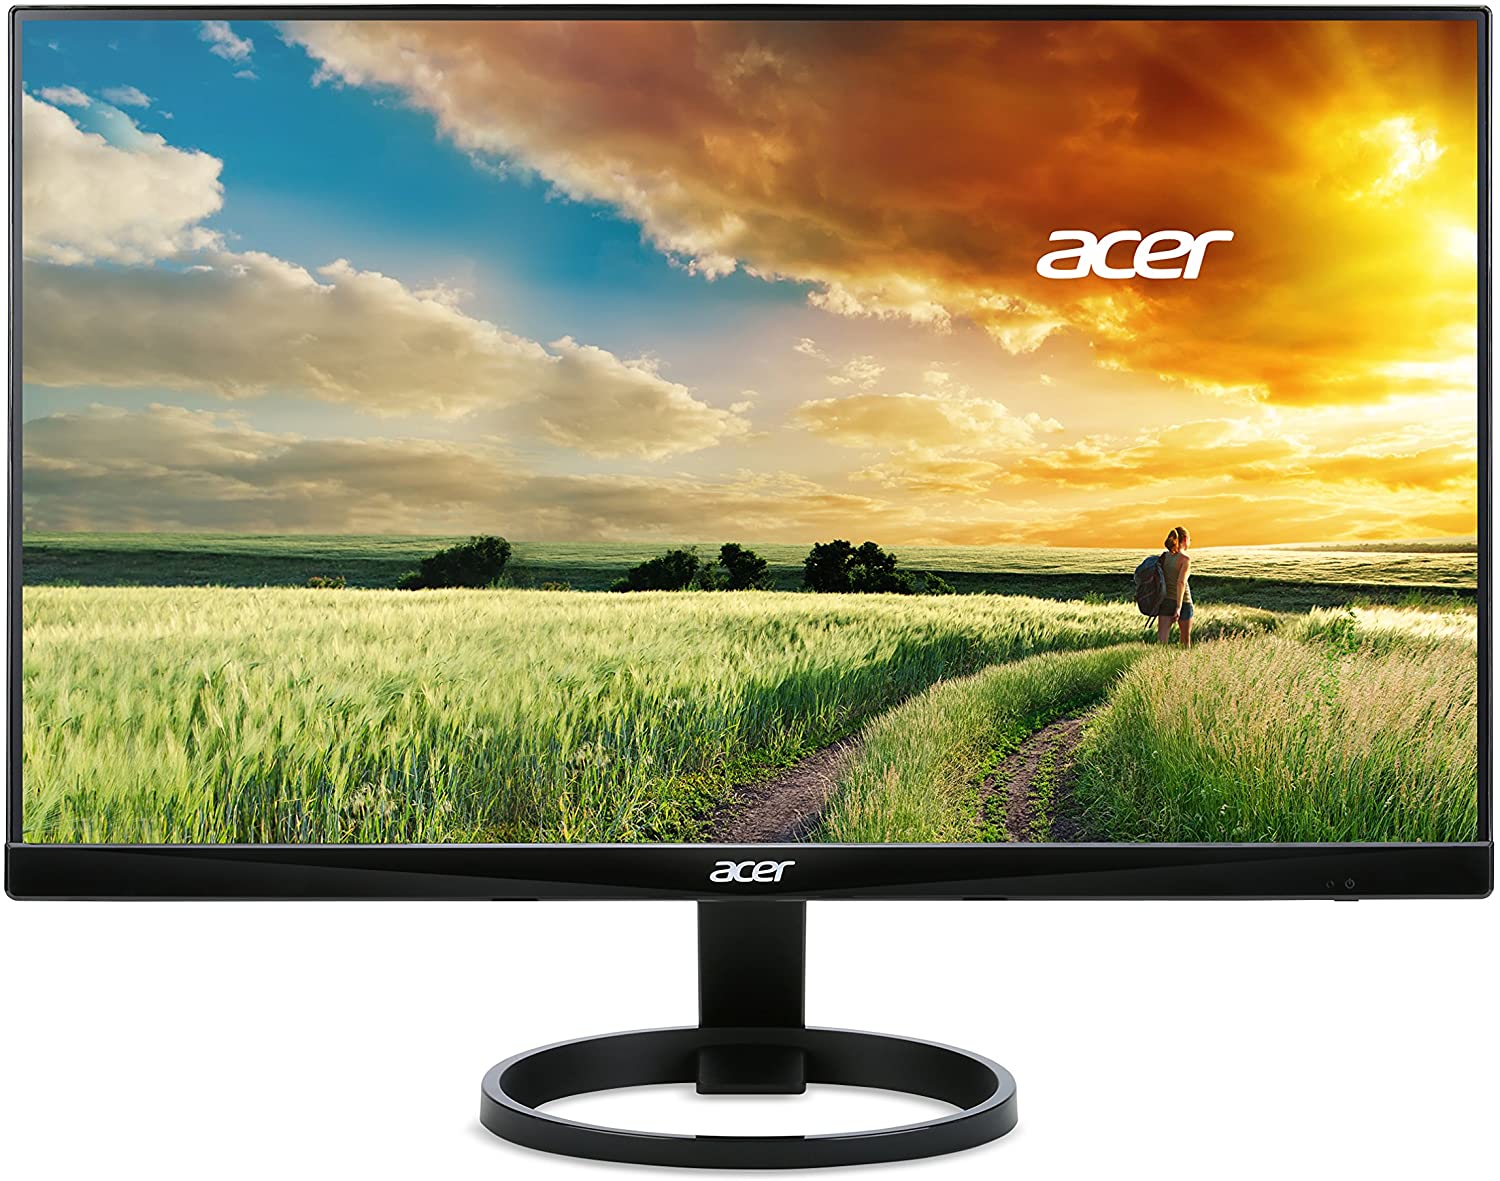  ACER R240HY